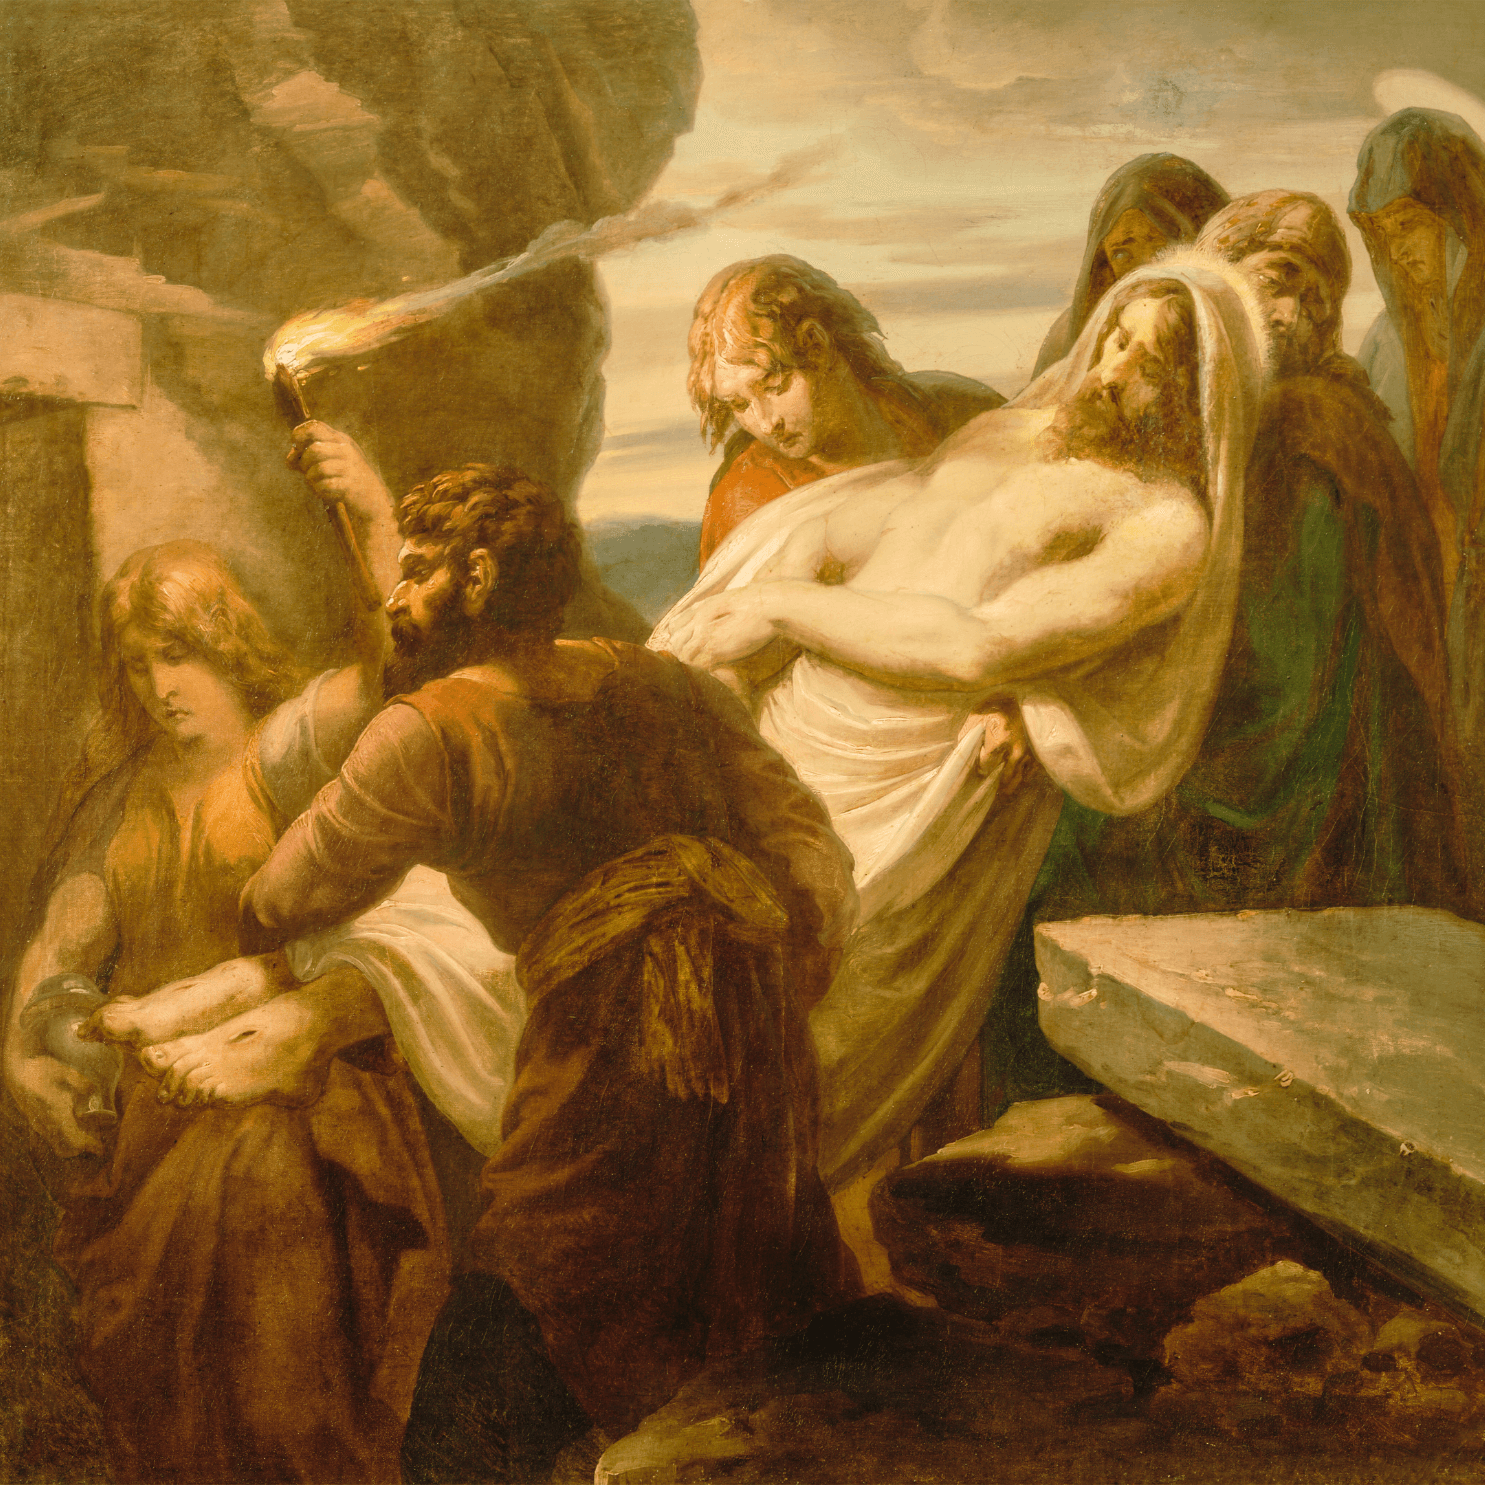 The Way of the Cross Fourteenth Station: Jesus is Laid in His Tomb